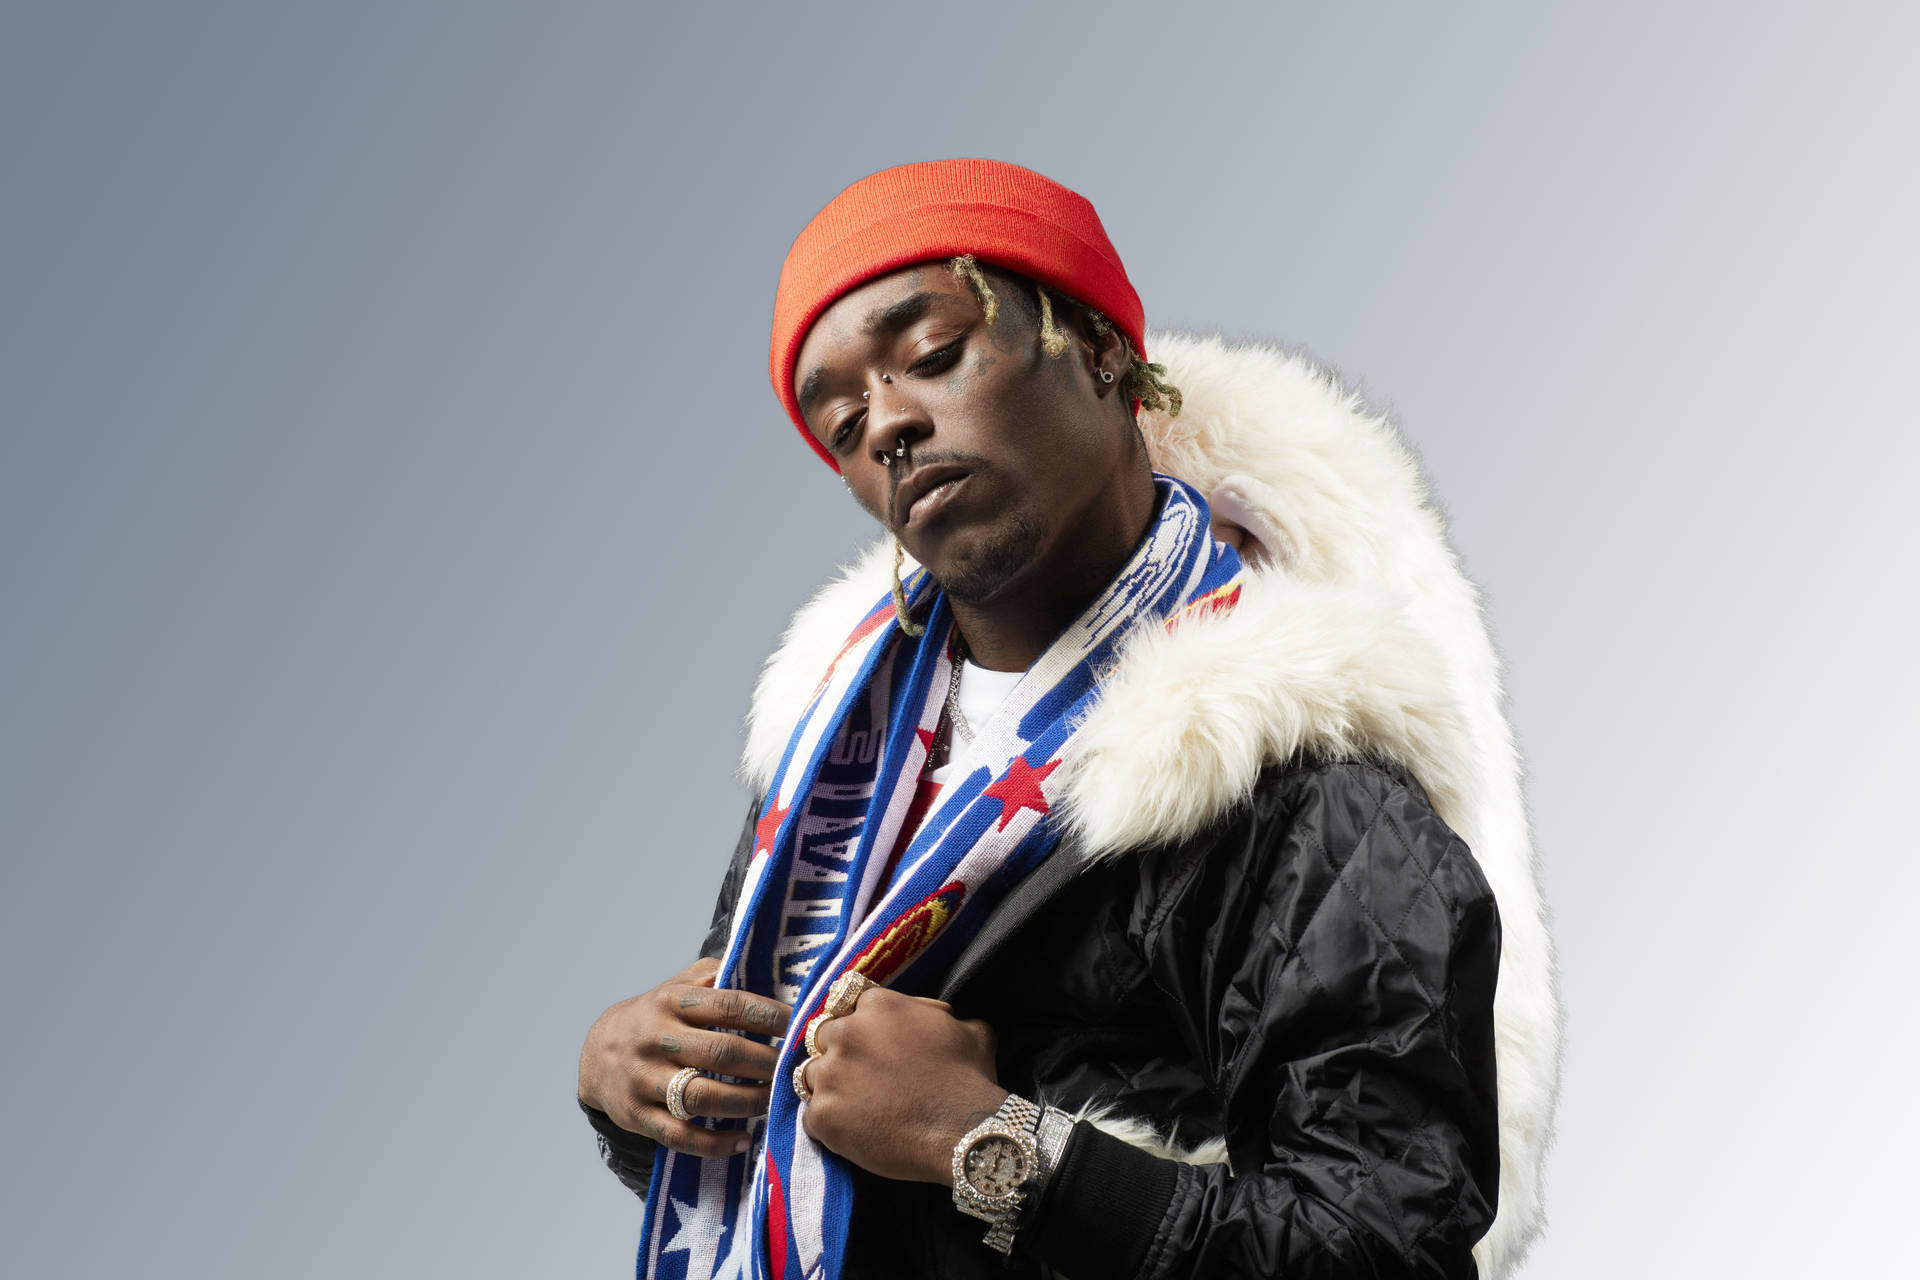 Lil Uzi Vert stands out in an all-white fur jacket Wallpaper